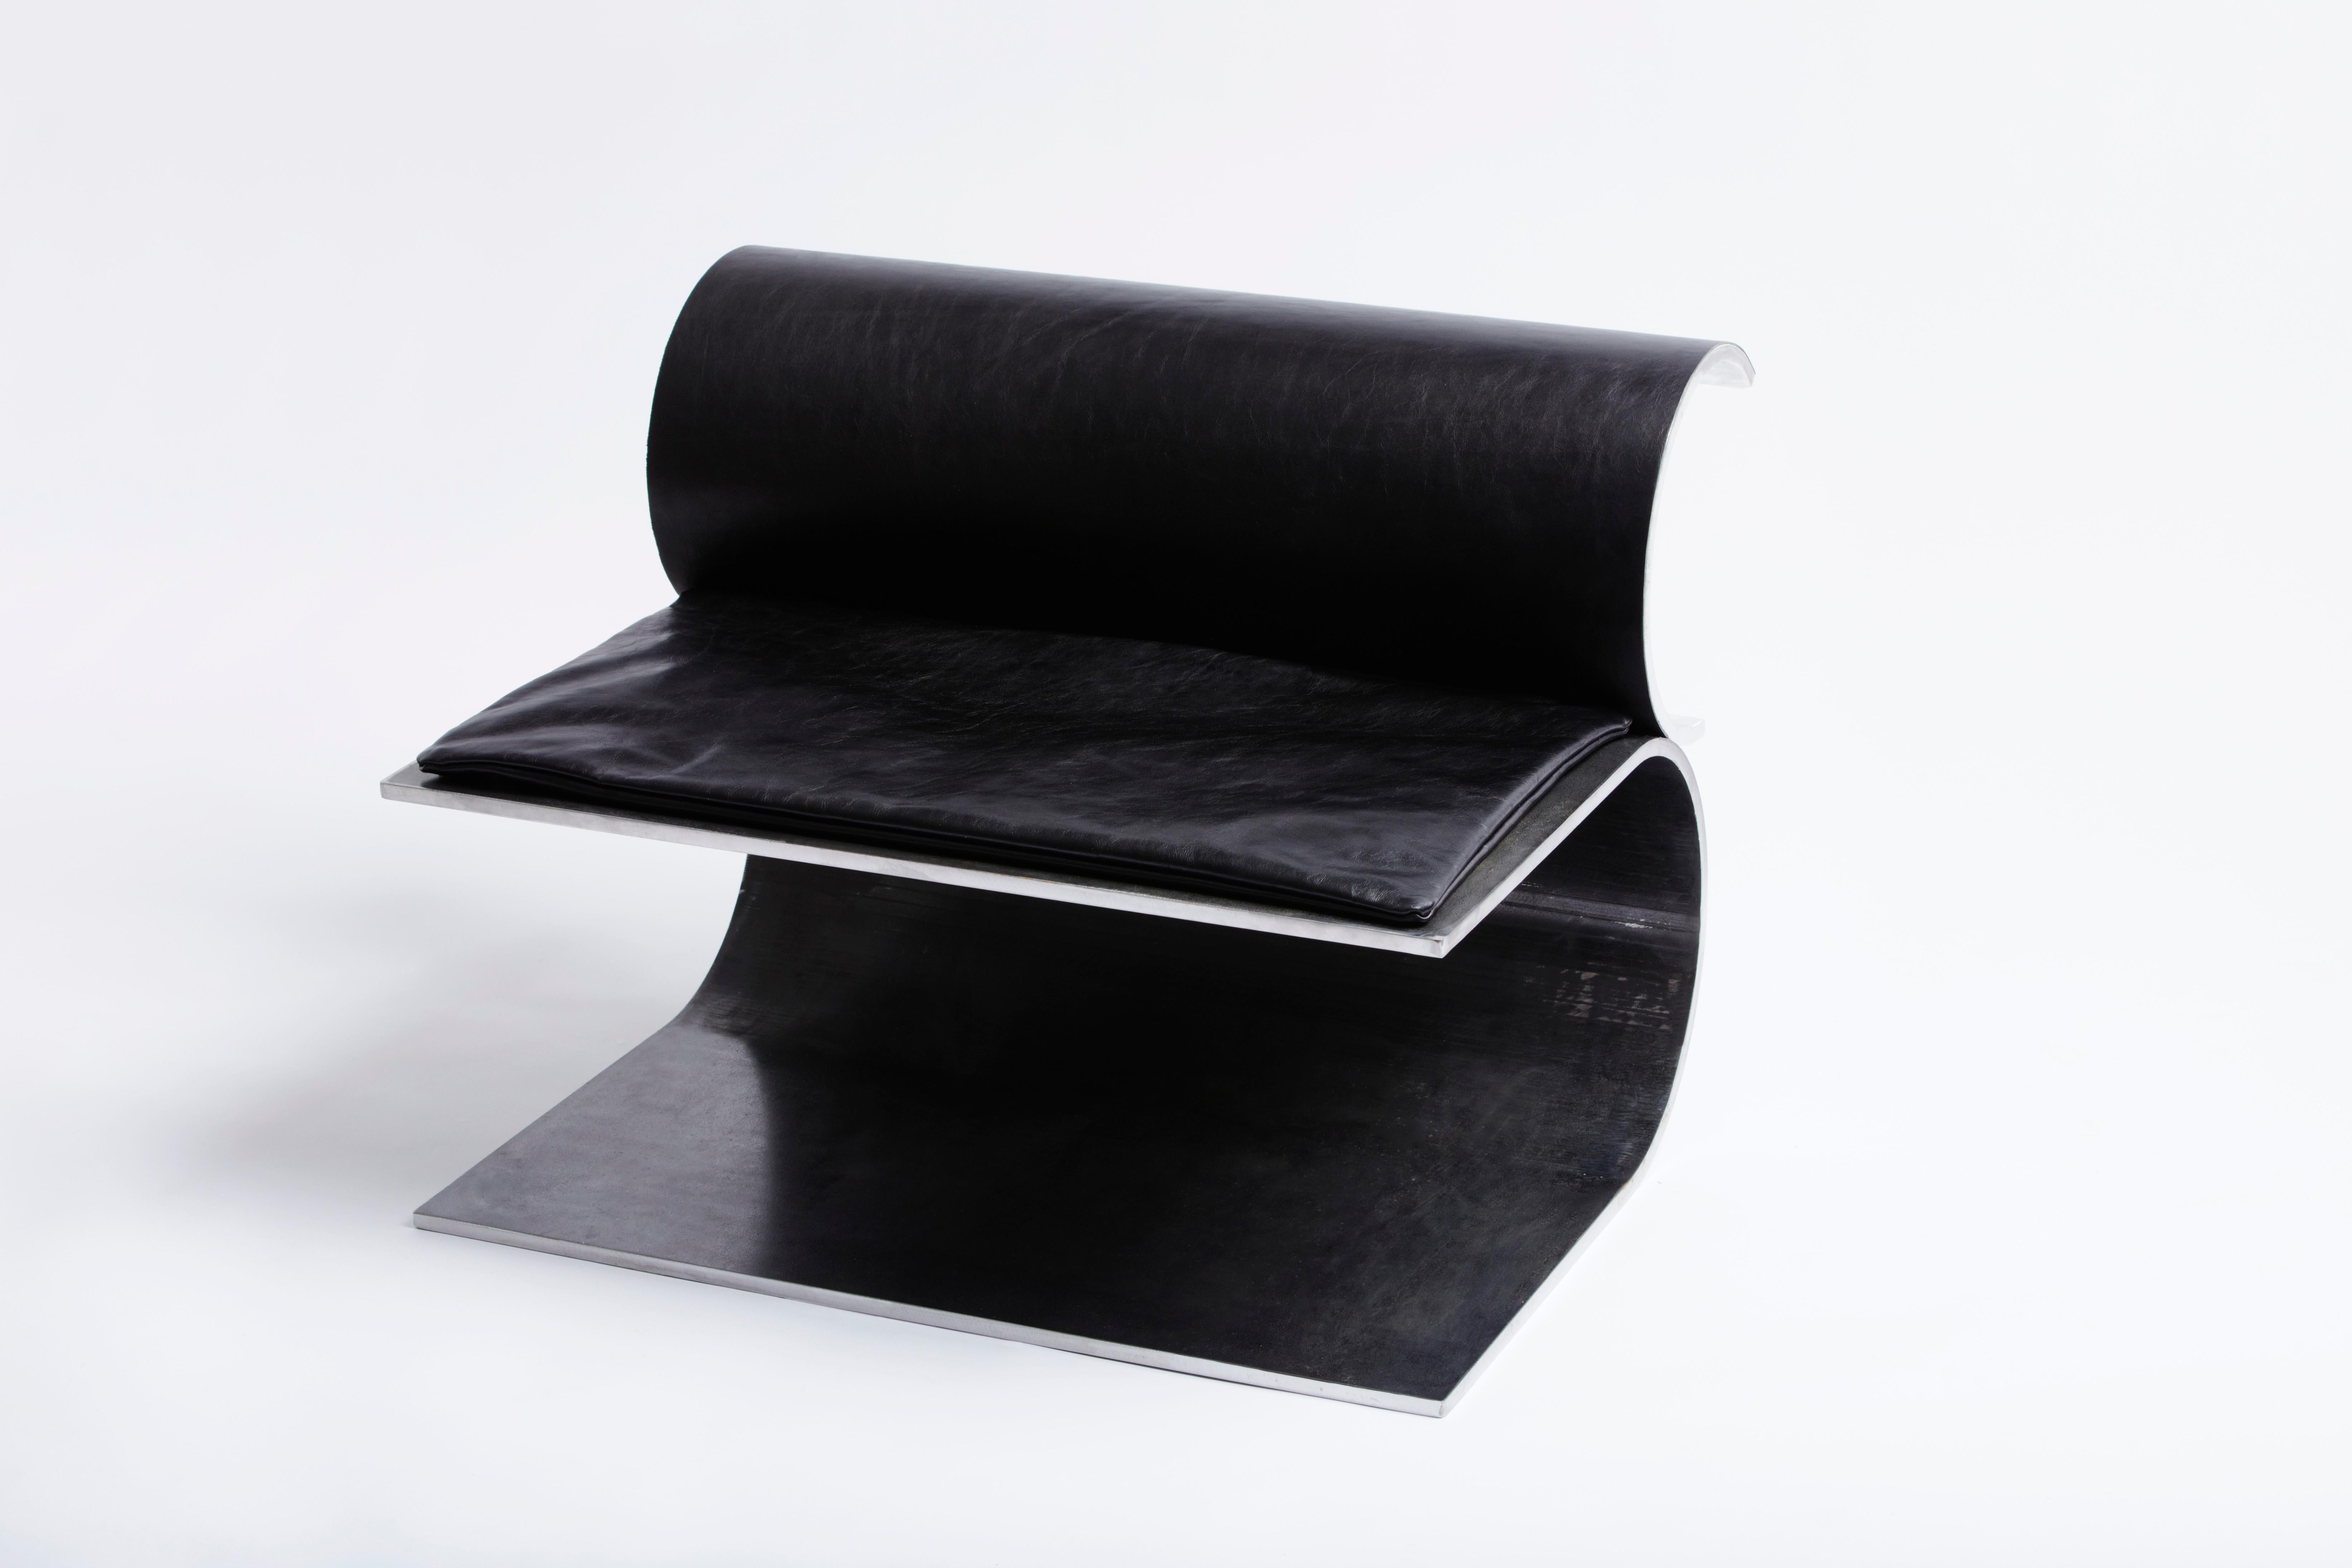 Fauteuil by Rue Intérieure
Dimensions: 76 x 64 x H 56 cm
Materials: Steel, leather
Designed and made in Montreal, Canada

Fine and elegant lines, the Fauteuil is made of two metal sheets rolled and juxtaposed together to create a